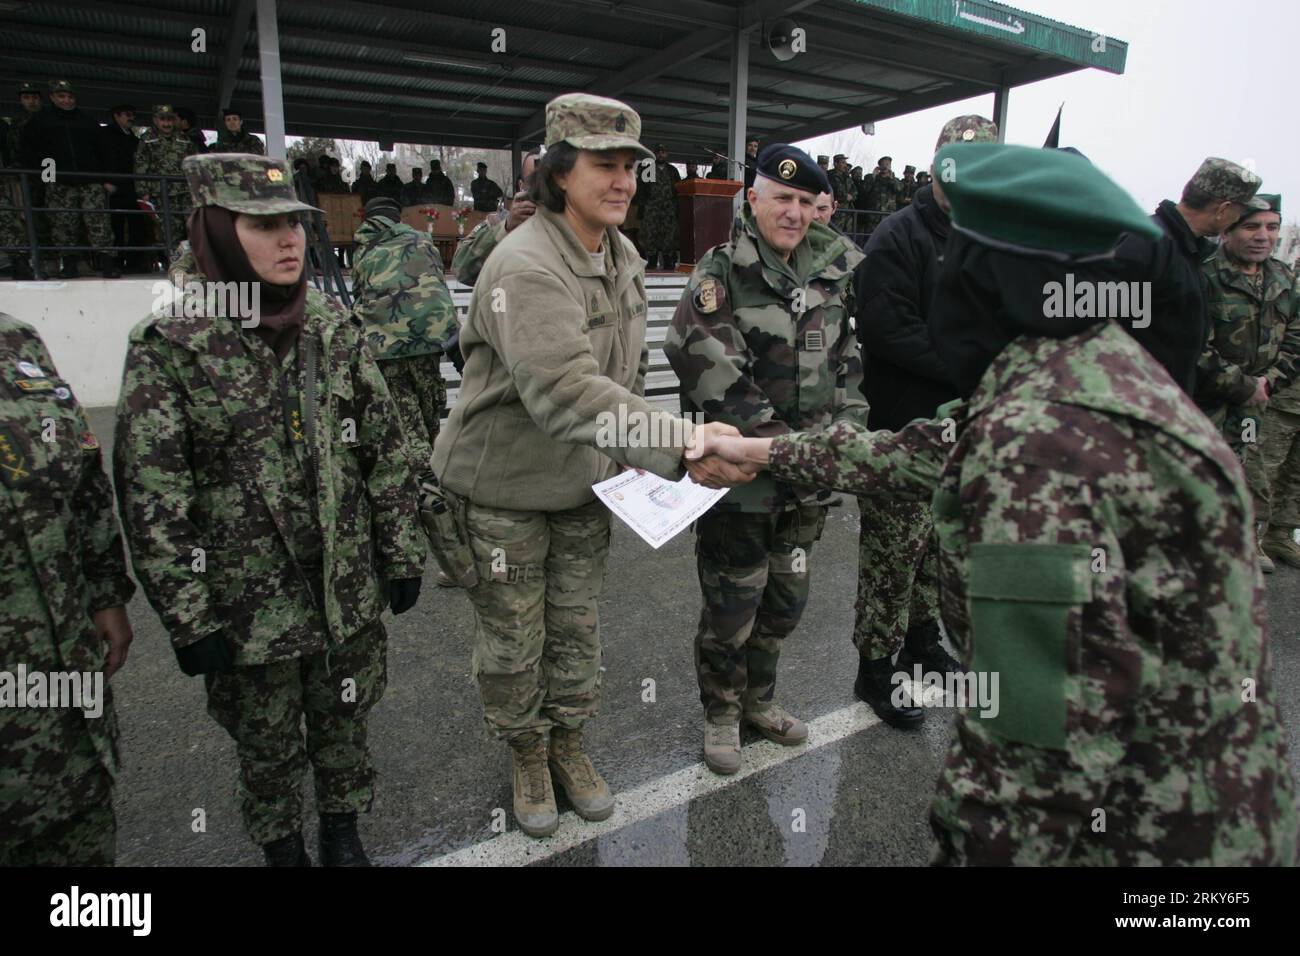 Bildnummer: 59155816  Datum: 31.01.2013  Copyright: imago/Xinhua (130131) -- KABUL, Jan. 31, 2013 (Xinhua) -- A newly graduated soldier receives her certificate during a graduation ceremony at the Kabul Military Training Center in Kabul, Afghanistan, on Jan. 31, 2013. A total of 1,400 soldiers graduated from Kabul Military Training Center (KMTC) on Thursday and were commissioned to Afghan National Army (ANA), General Aminullah Patyannai commander of KMTC said. (Xinhua/Ahmad Massoud) AFGHANISTAN-KABUL-SOLDIERS-GRADUATION PUBLICATIONxNOTxINxCHN Gesellschaft Militär Armee Soldat Ausbildung Militä Stock Photo